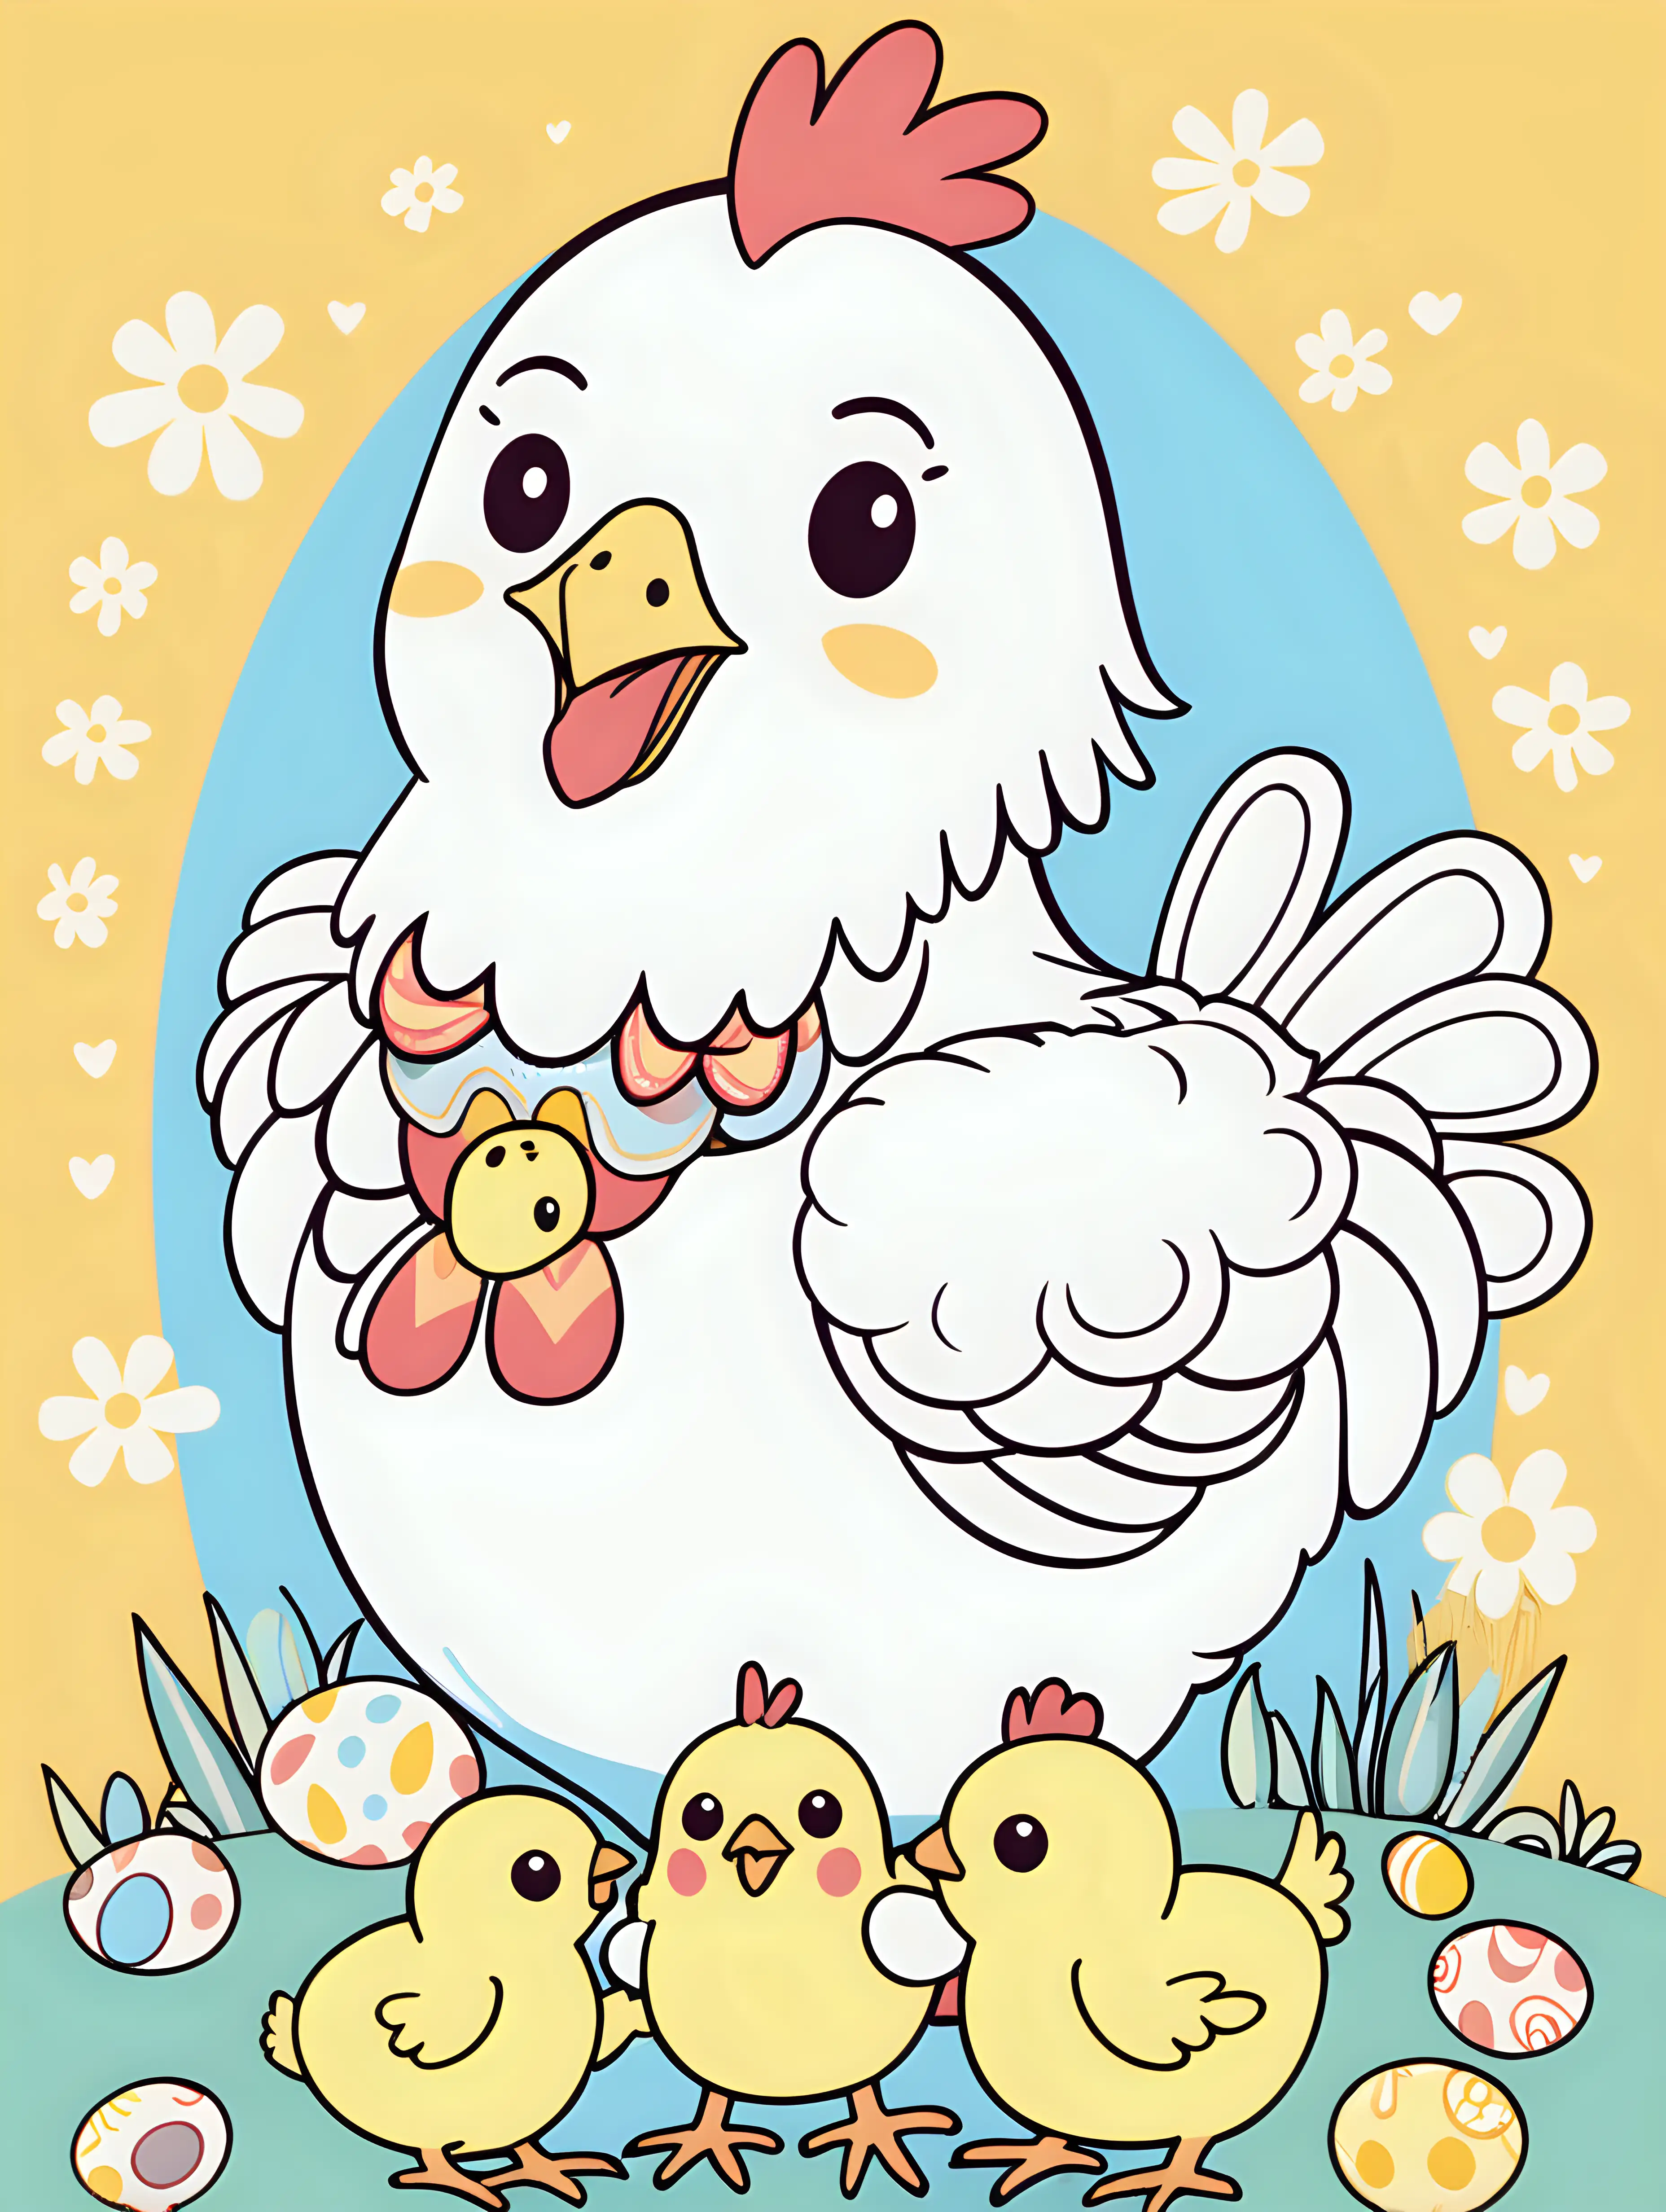 Cheerful Kawaii Mama Chicken with Baby Chicks in Easter Ambiance